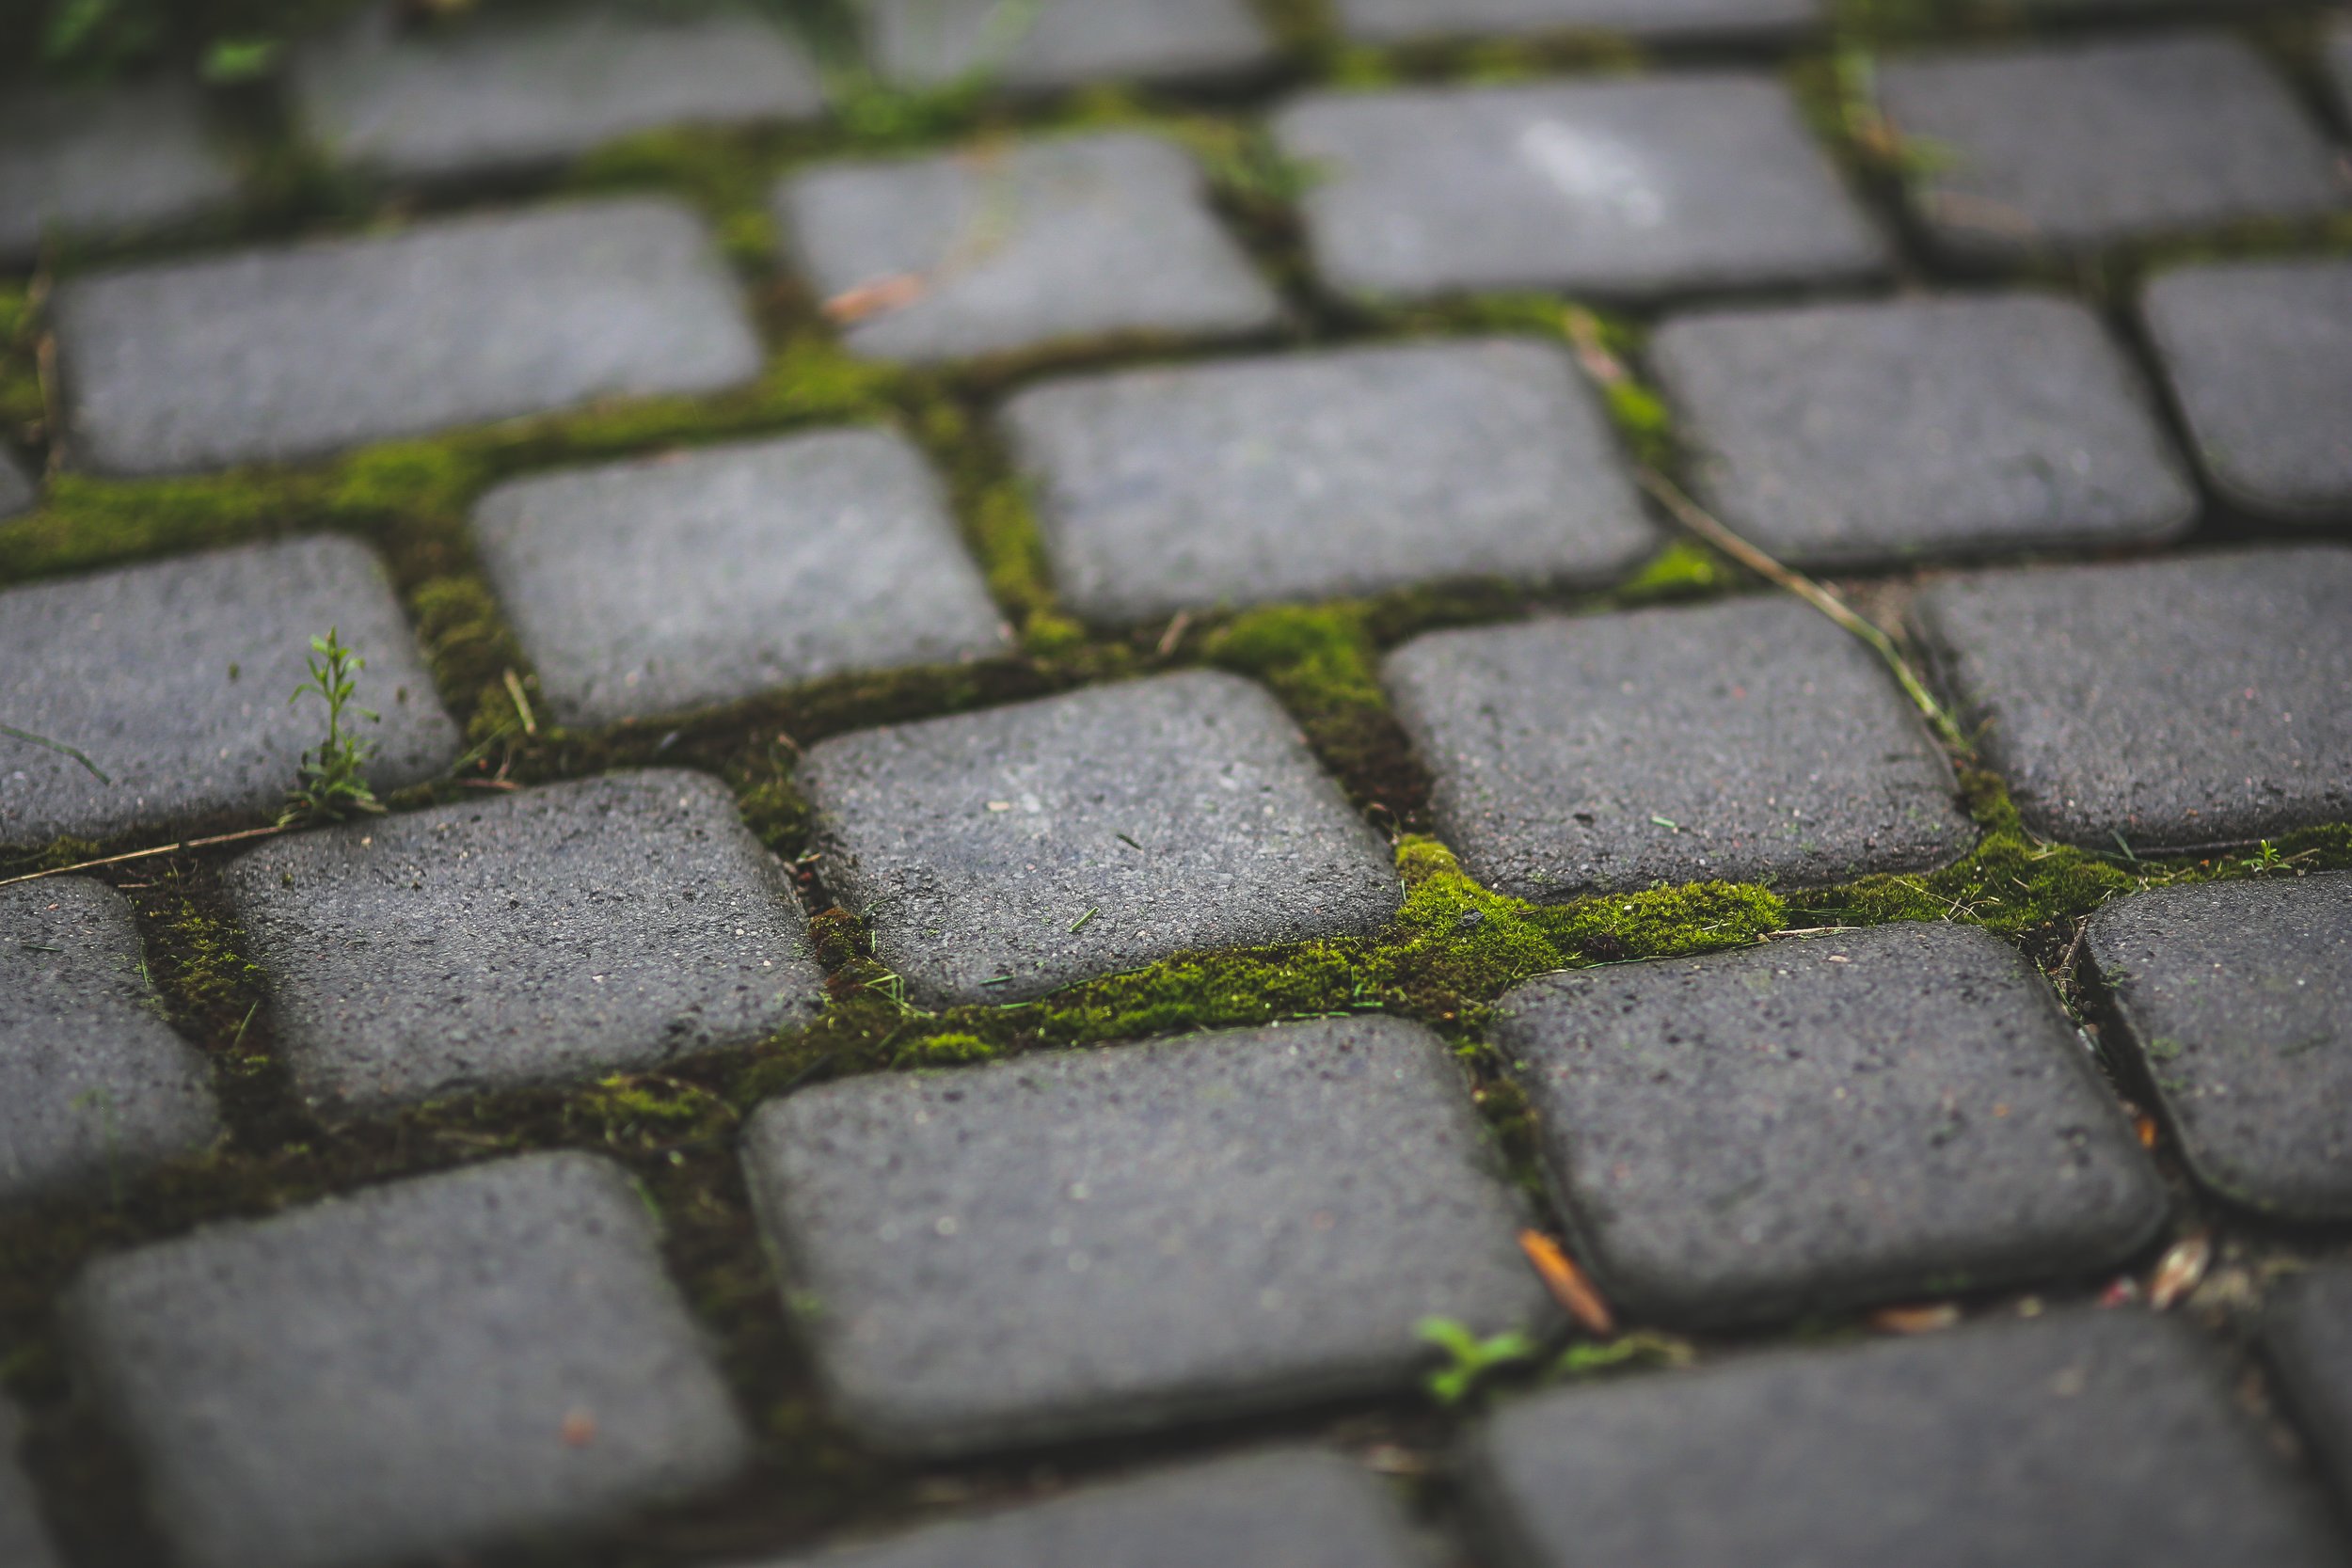 Sidewalk and street pavers that are more porous than traditional pavement reduce stormwater runoff and associated pollution and flooding risk.